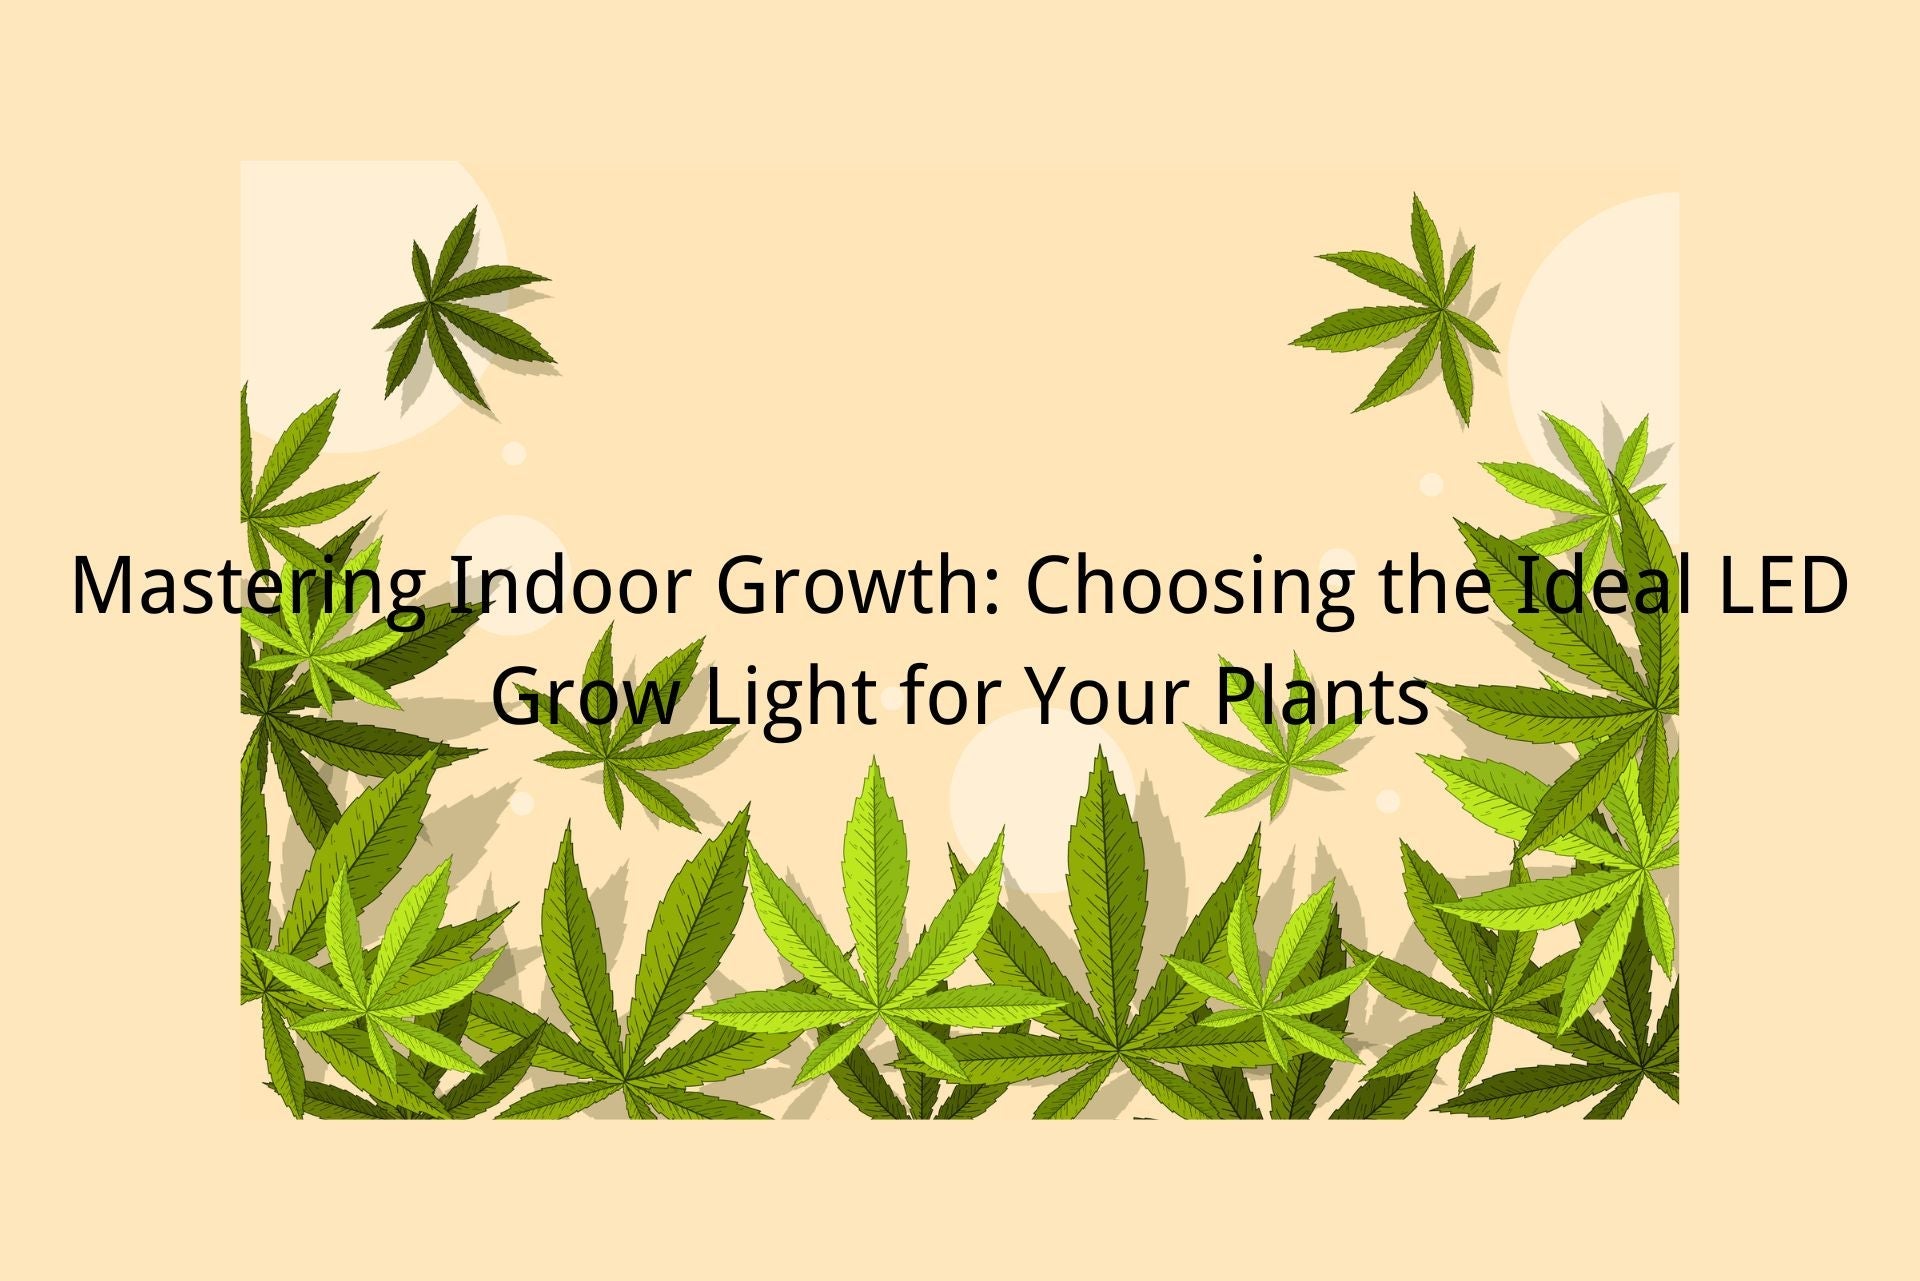 Mastering Indoor Growth: Choosing the Ideal LED Grow Light for Your Plants